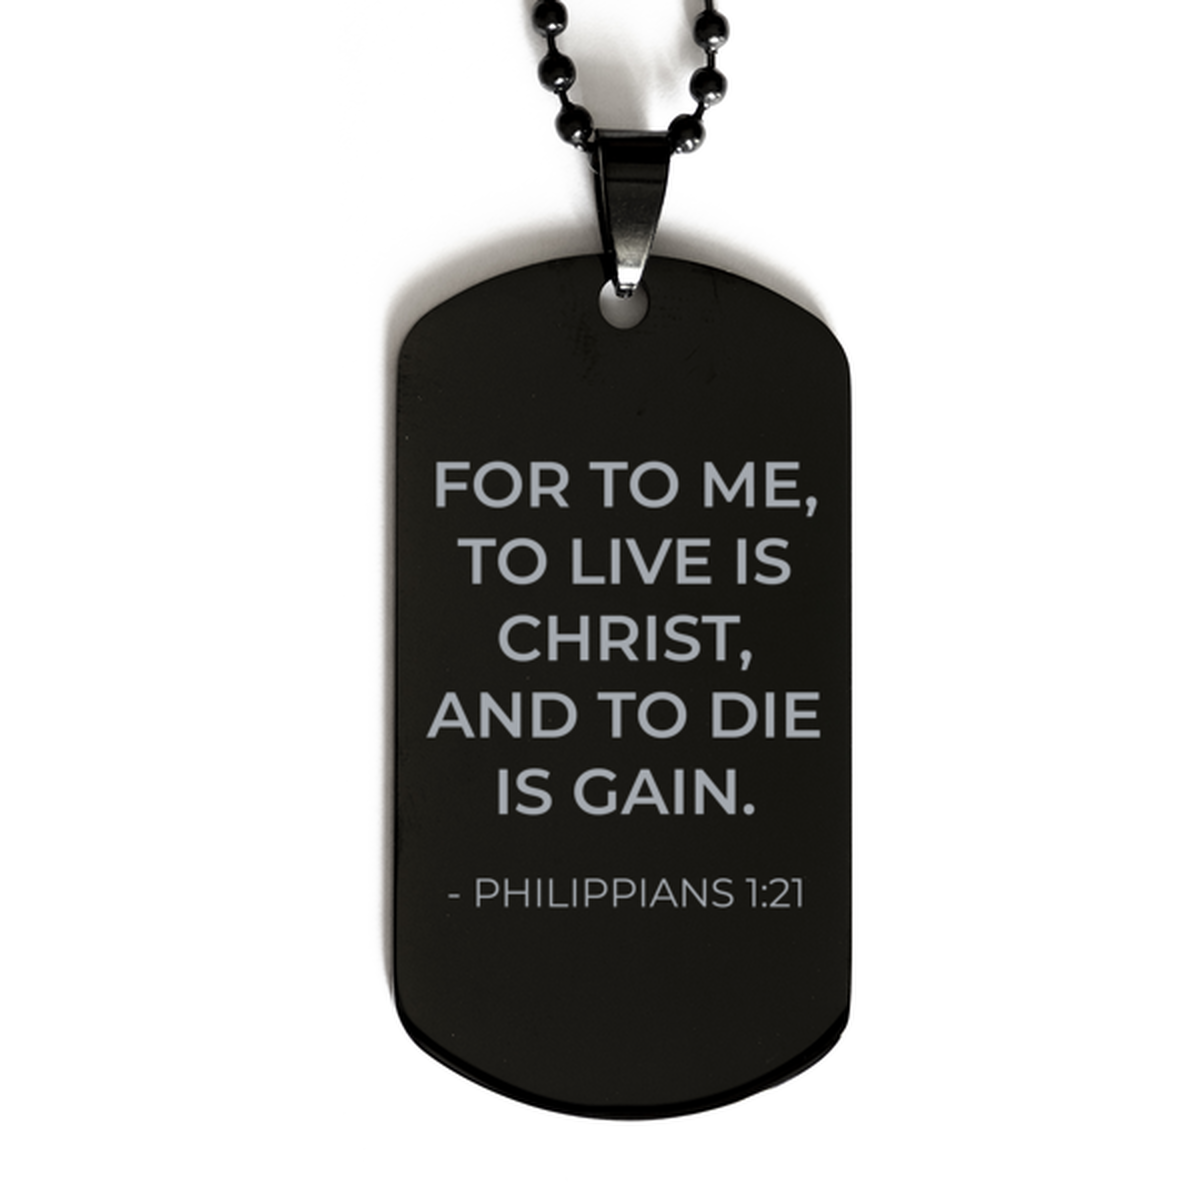 Bible Verse Black Dog Tag, Philippians 1:21 For To Me, To Live Is Christ, And To Die, Christian Inspirational Necklace Gifts For Men Women